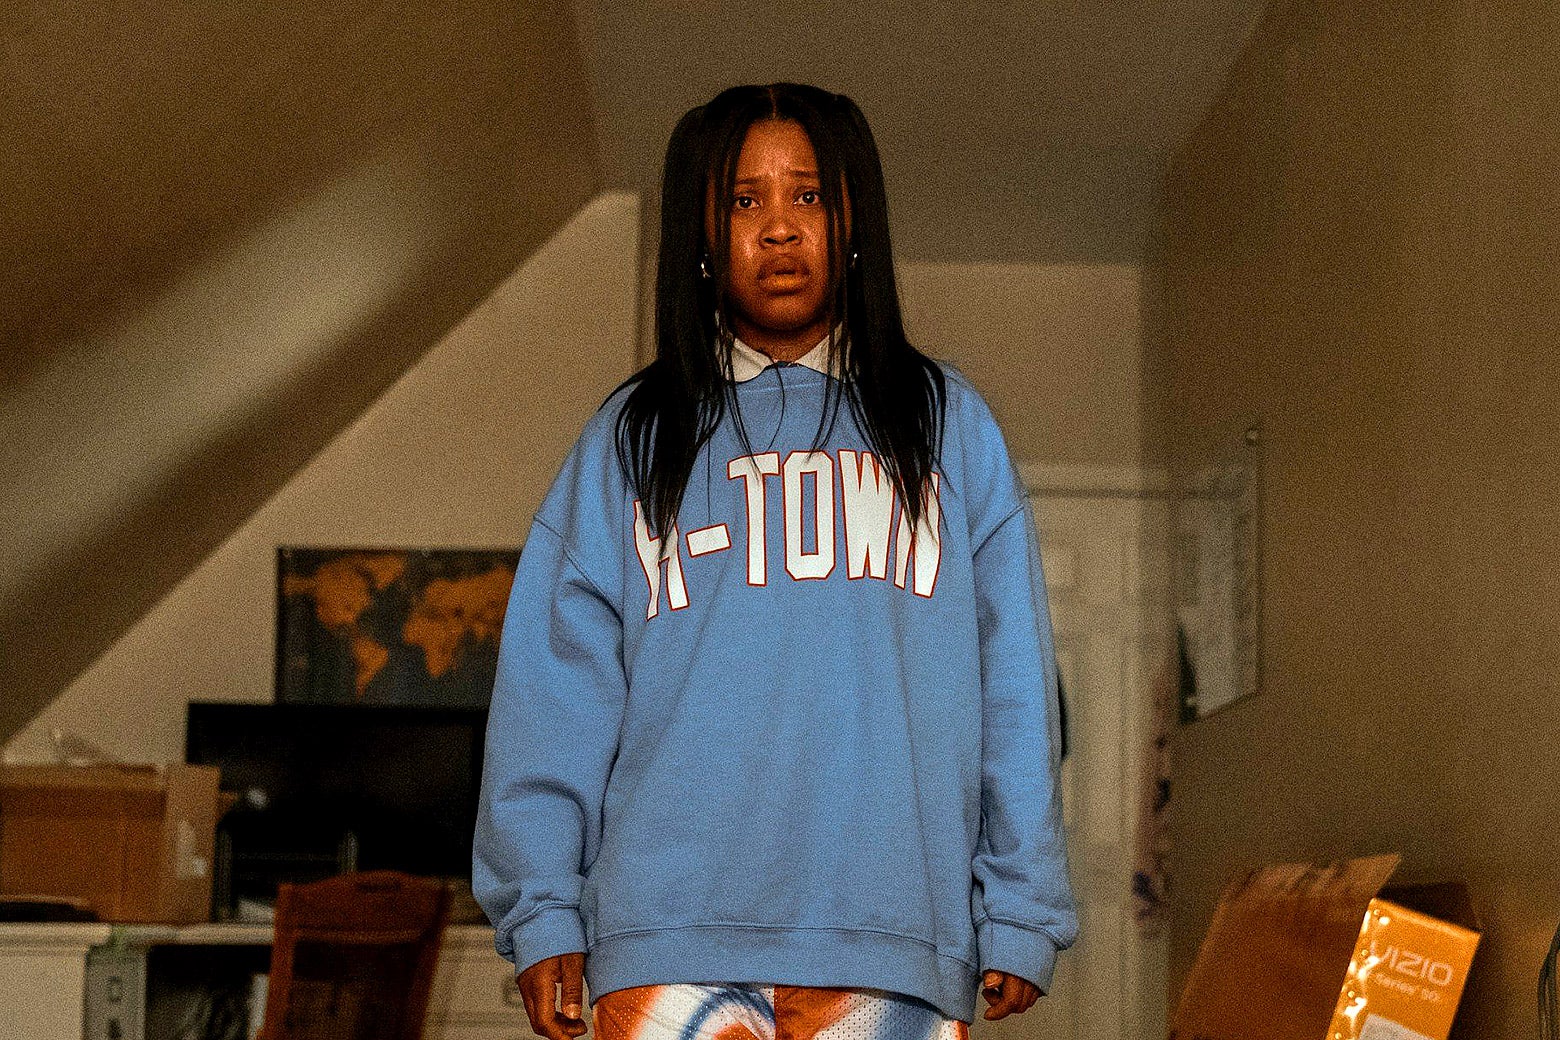 A woman in a sweatshirt that reads "H-Town" stands in a room. 